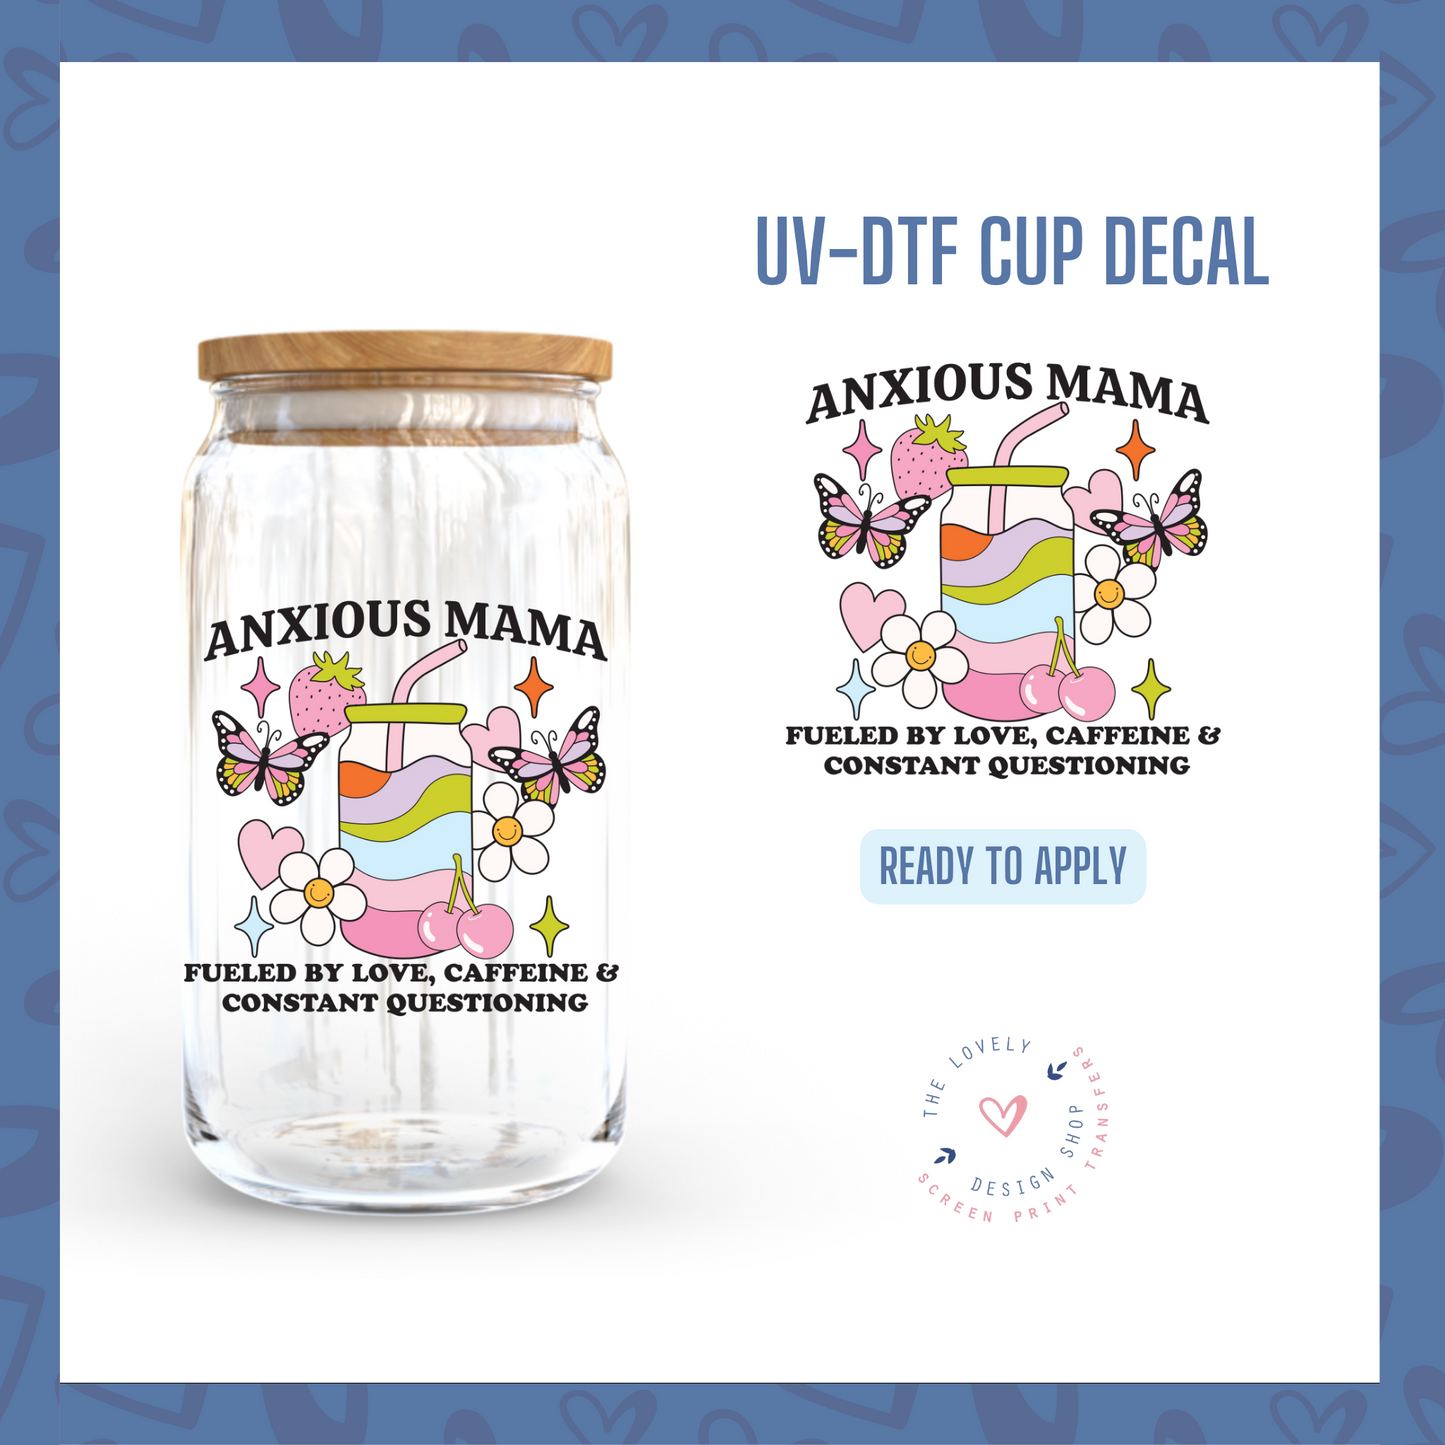 Anxious Mama - UV DTF Cup Decal (Ready to Ship) Apr 8